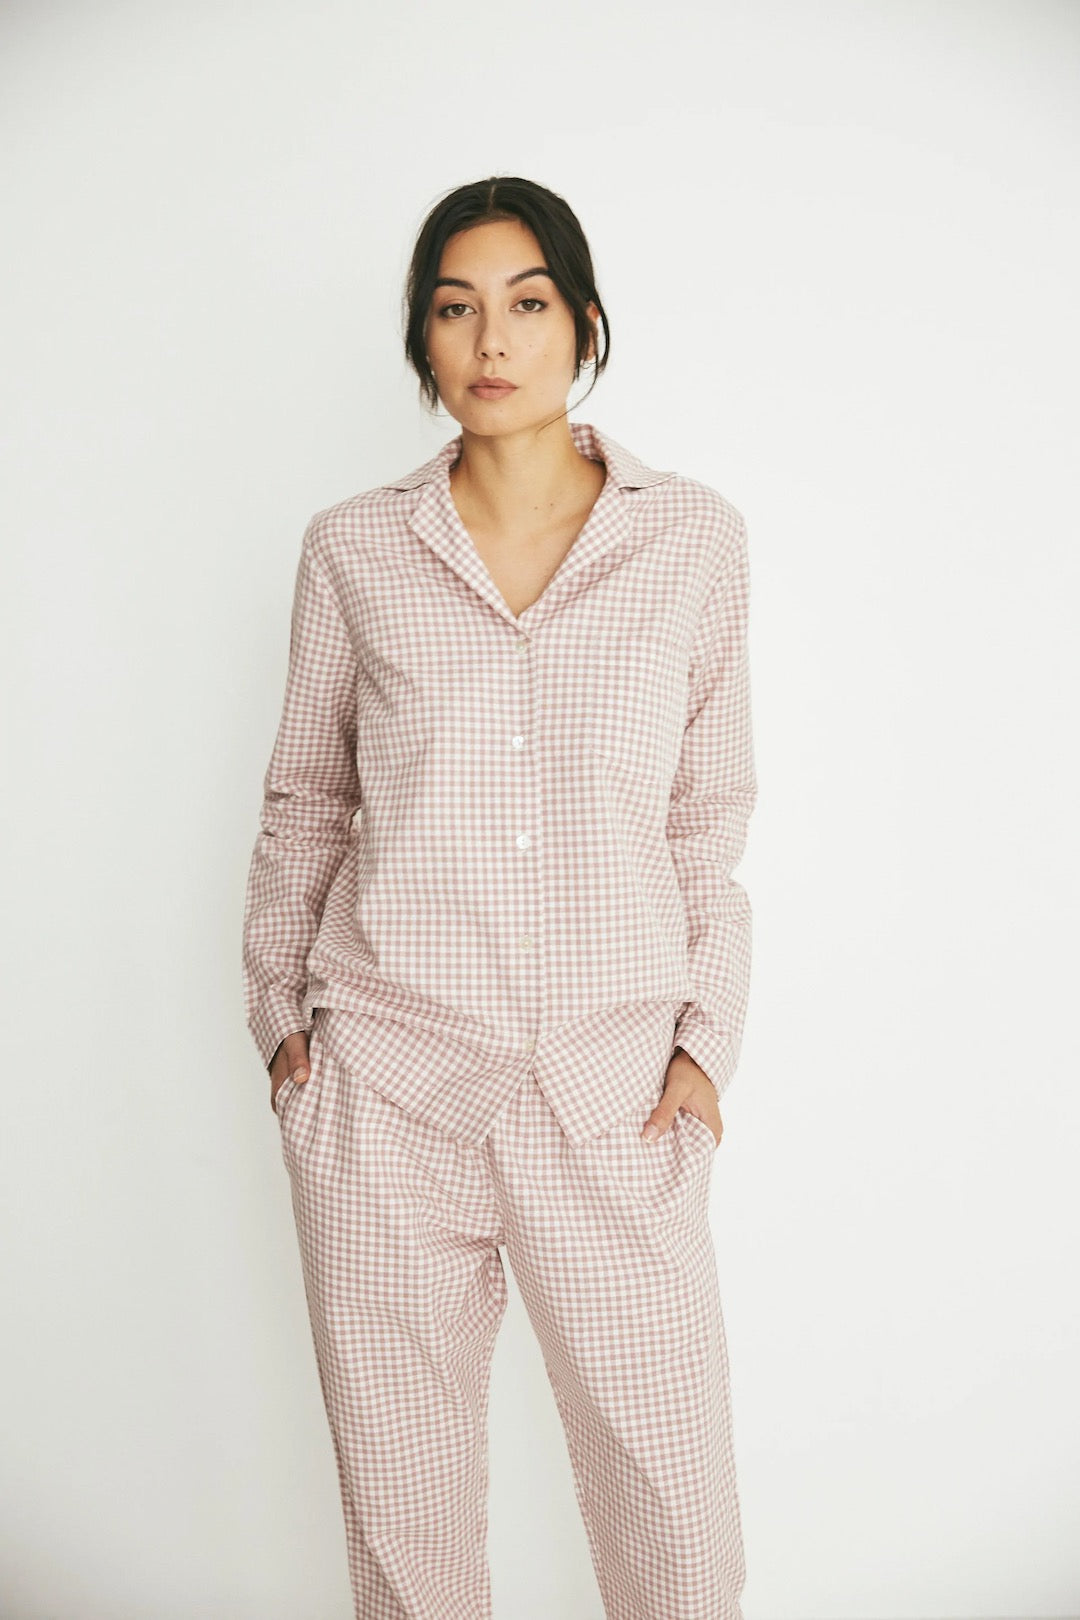 The model is wearing a General Sleep Classic Set - Rose Gingham.